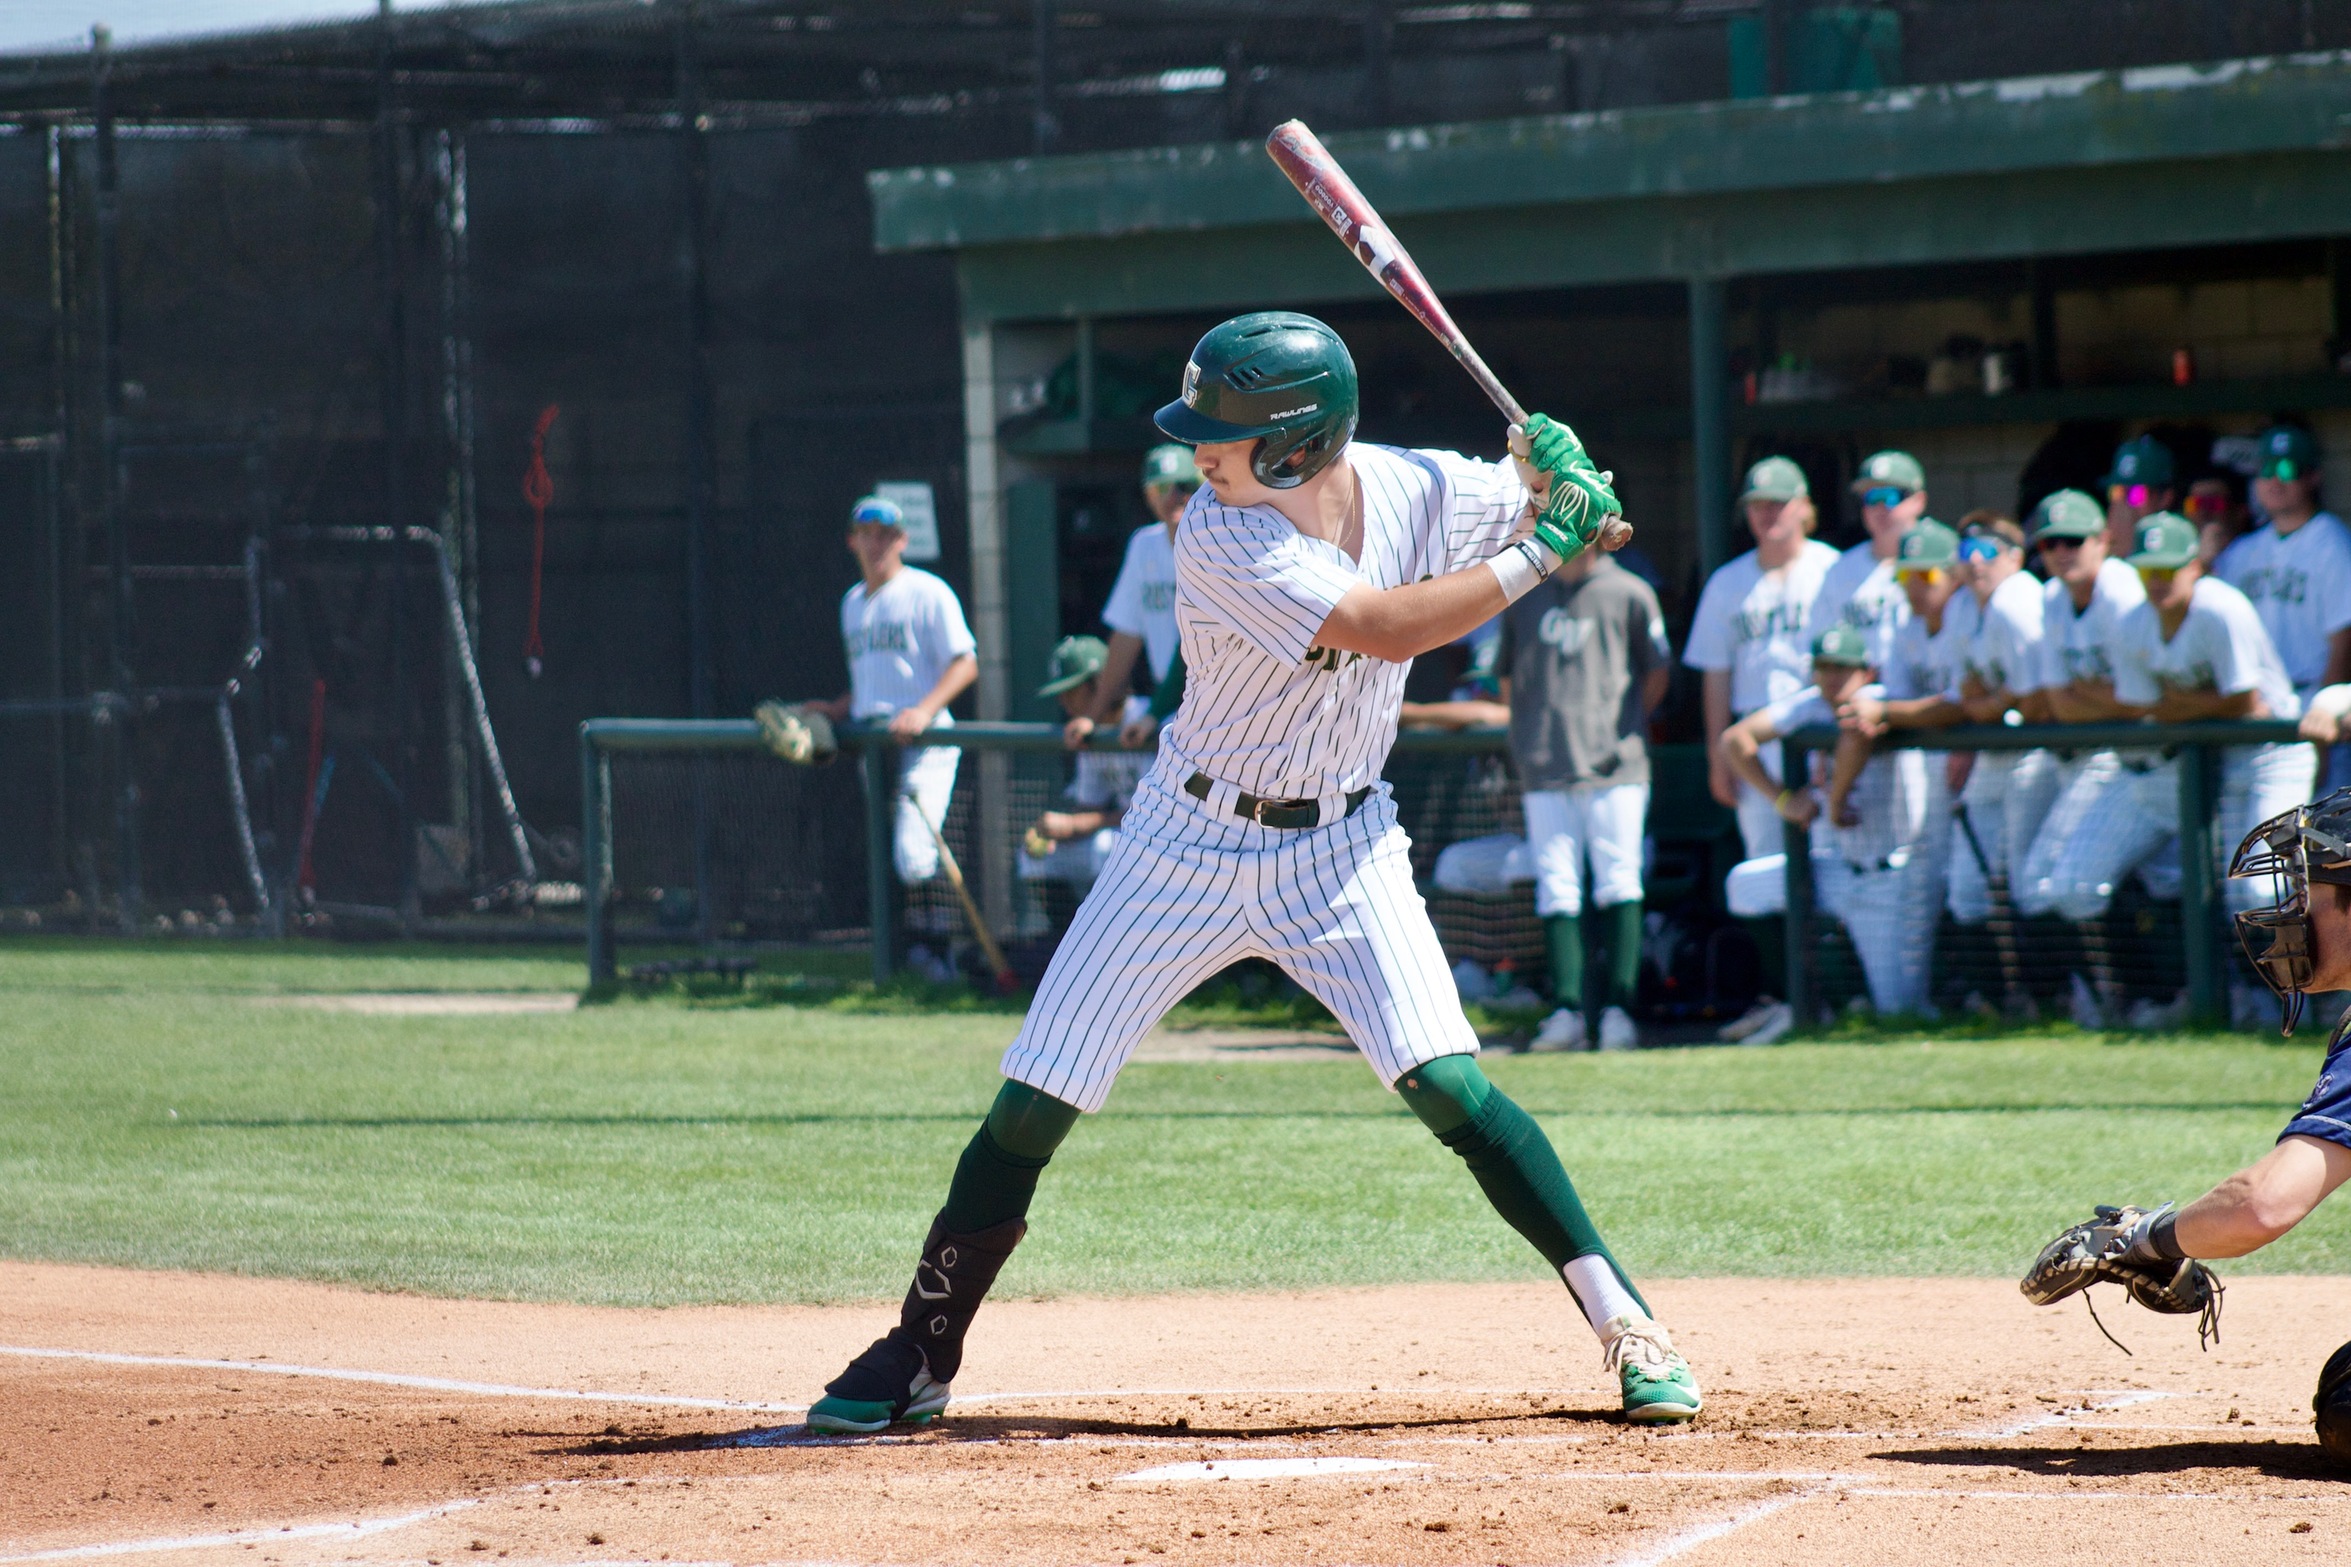 Baseball: Kordic's Perfect Day at the Plate Propels Rustlers